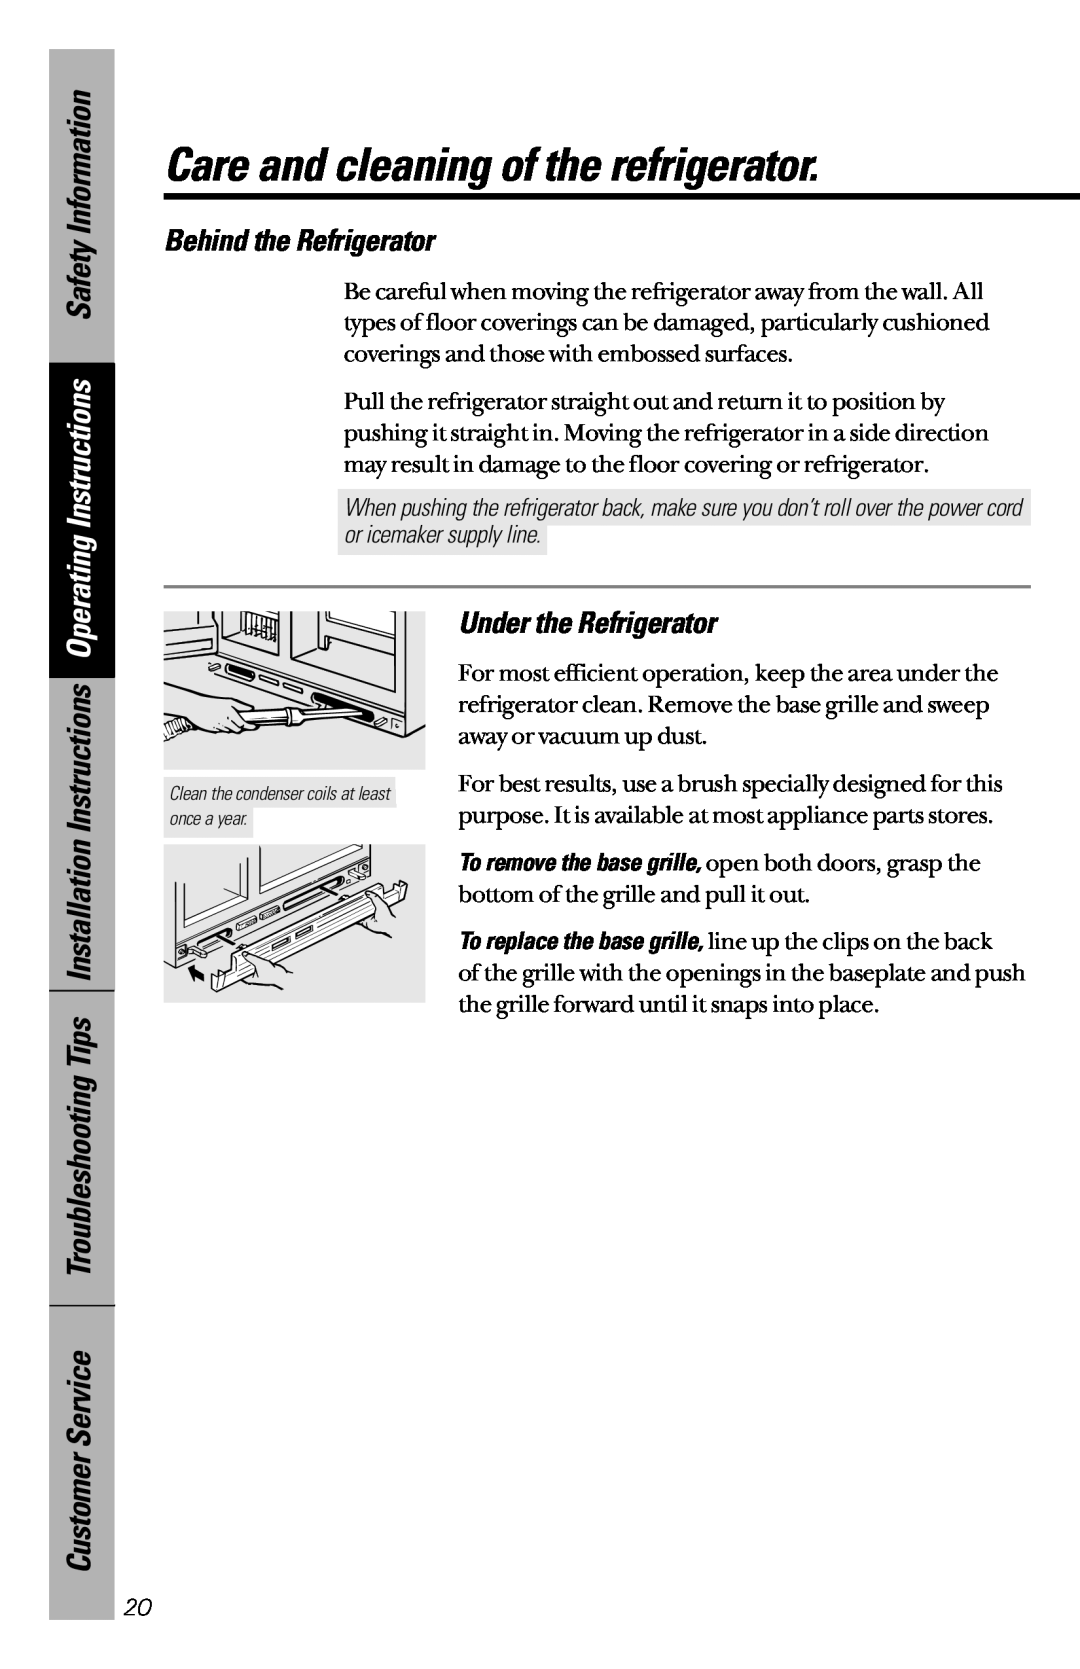 GE 28, 30 owner manual Operating Instructions Safety Information, Behind the Refrigerator, Under the Refrigerator 